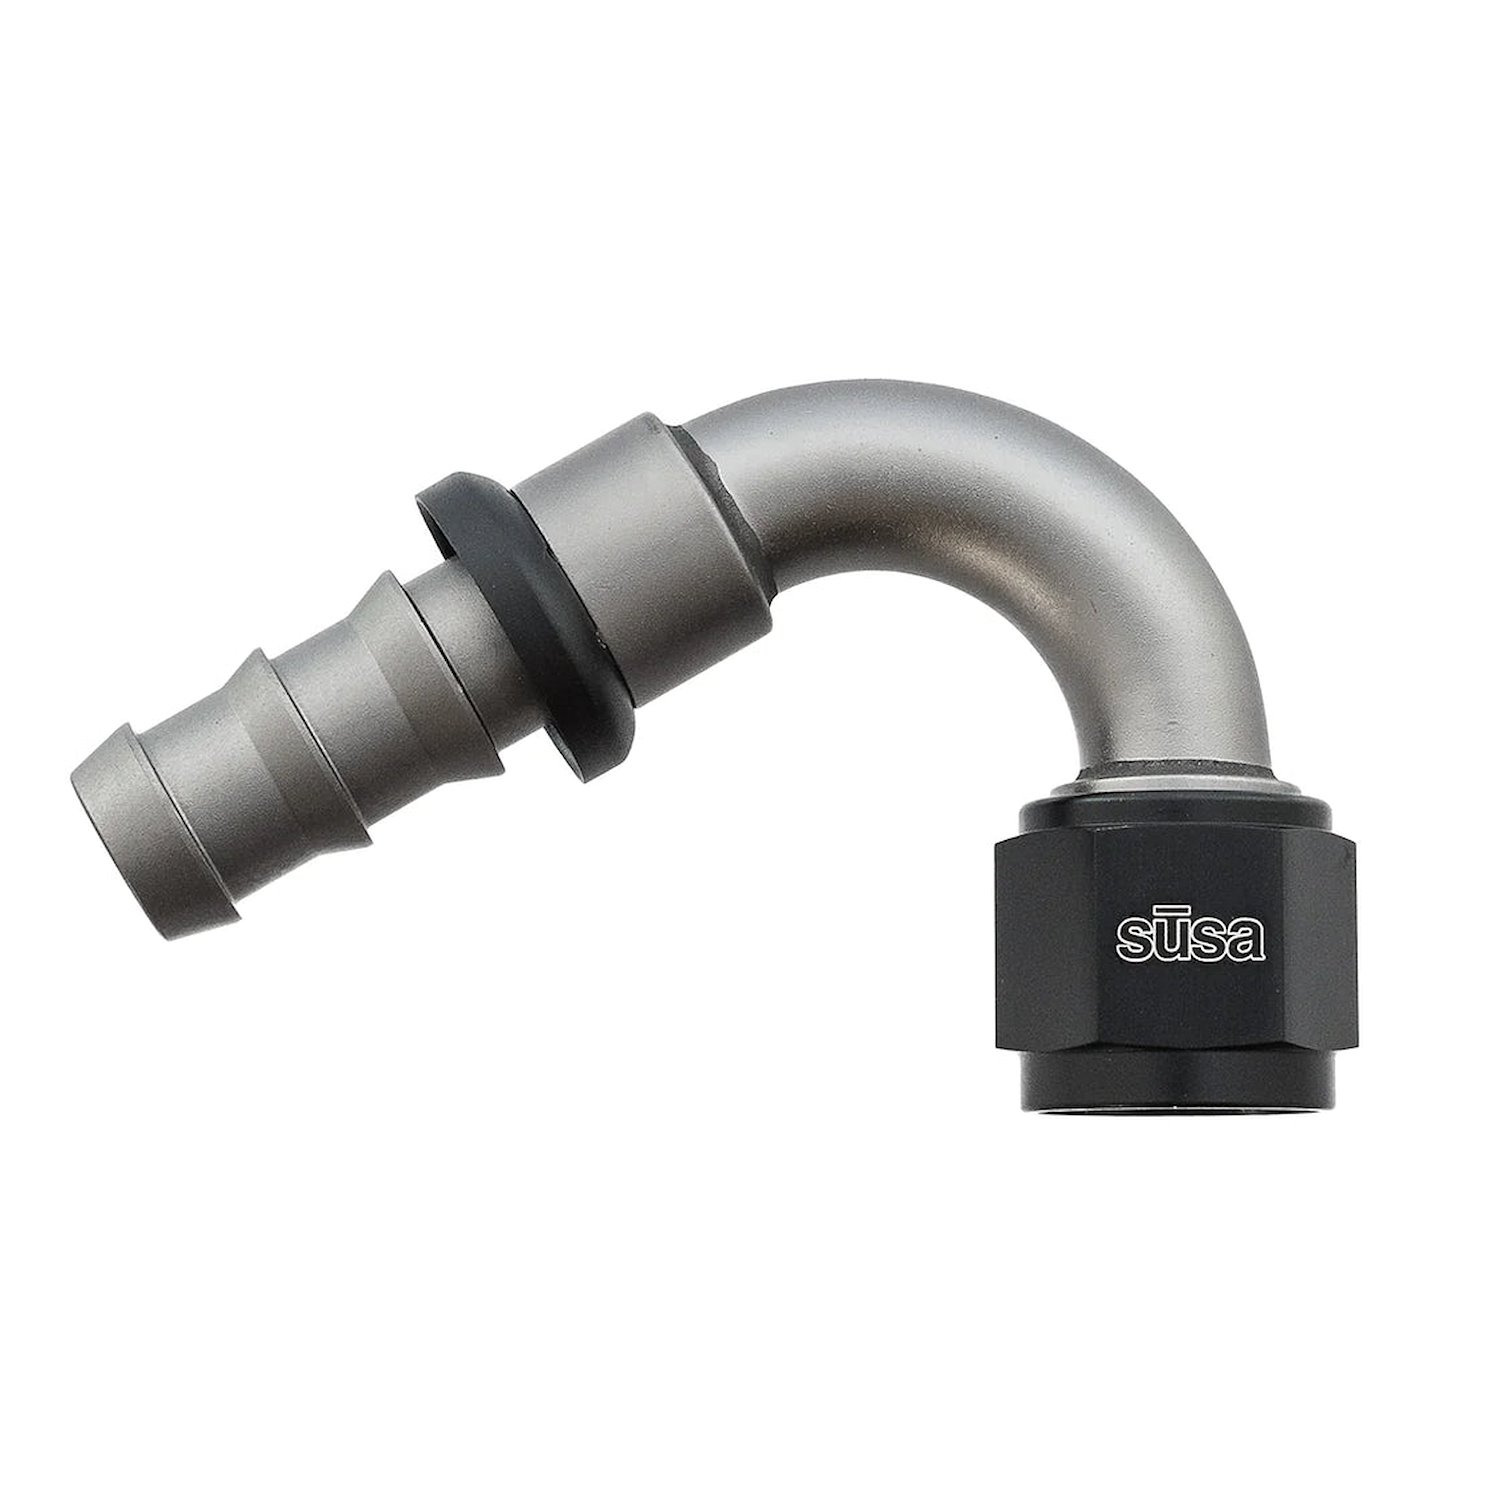 22-AN10PL10-120 Hose End, AN to PushLock Fitting, AN10 Female to -10 PushLock Male, 120-Degree